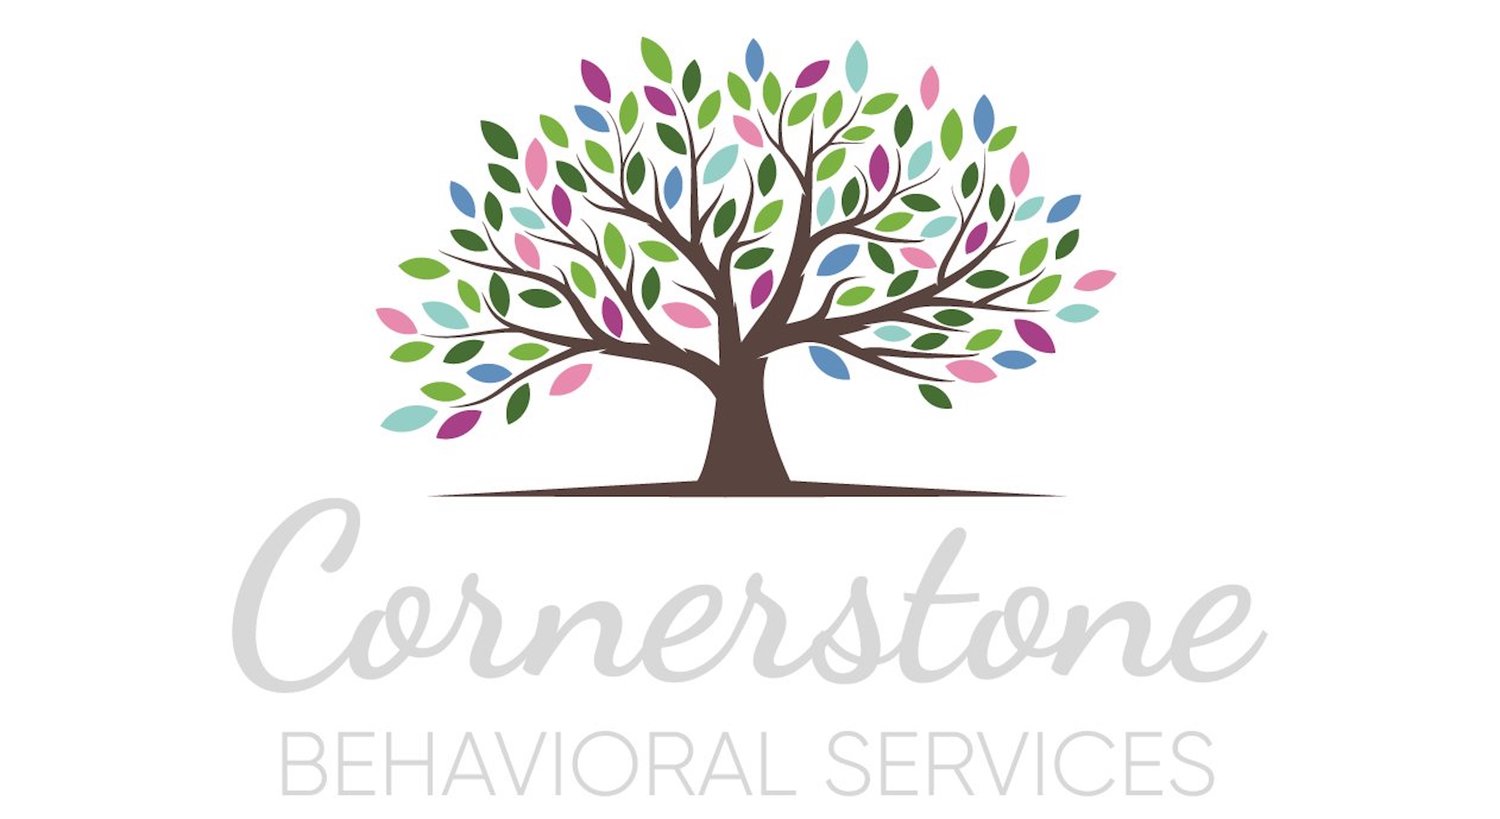 Cornerstone Behavioral Services, based in Wantagh, works one on one with individuals with special needs.